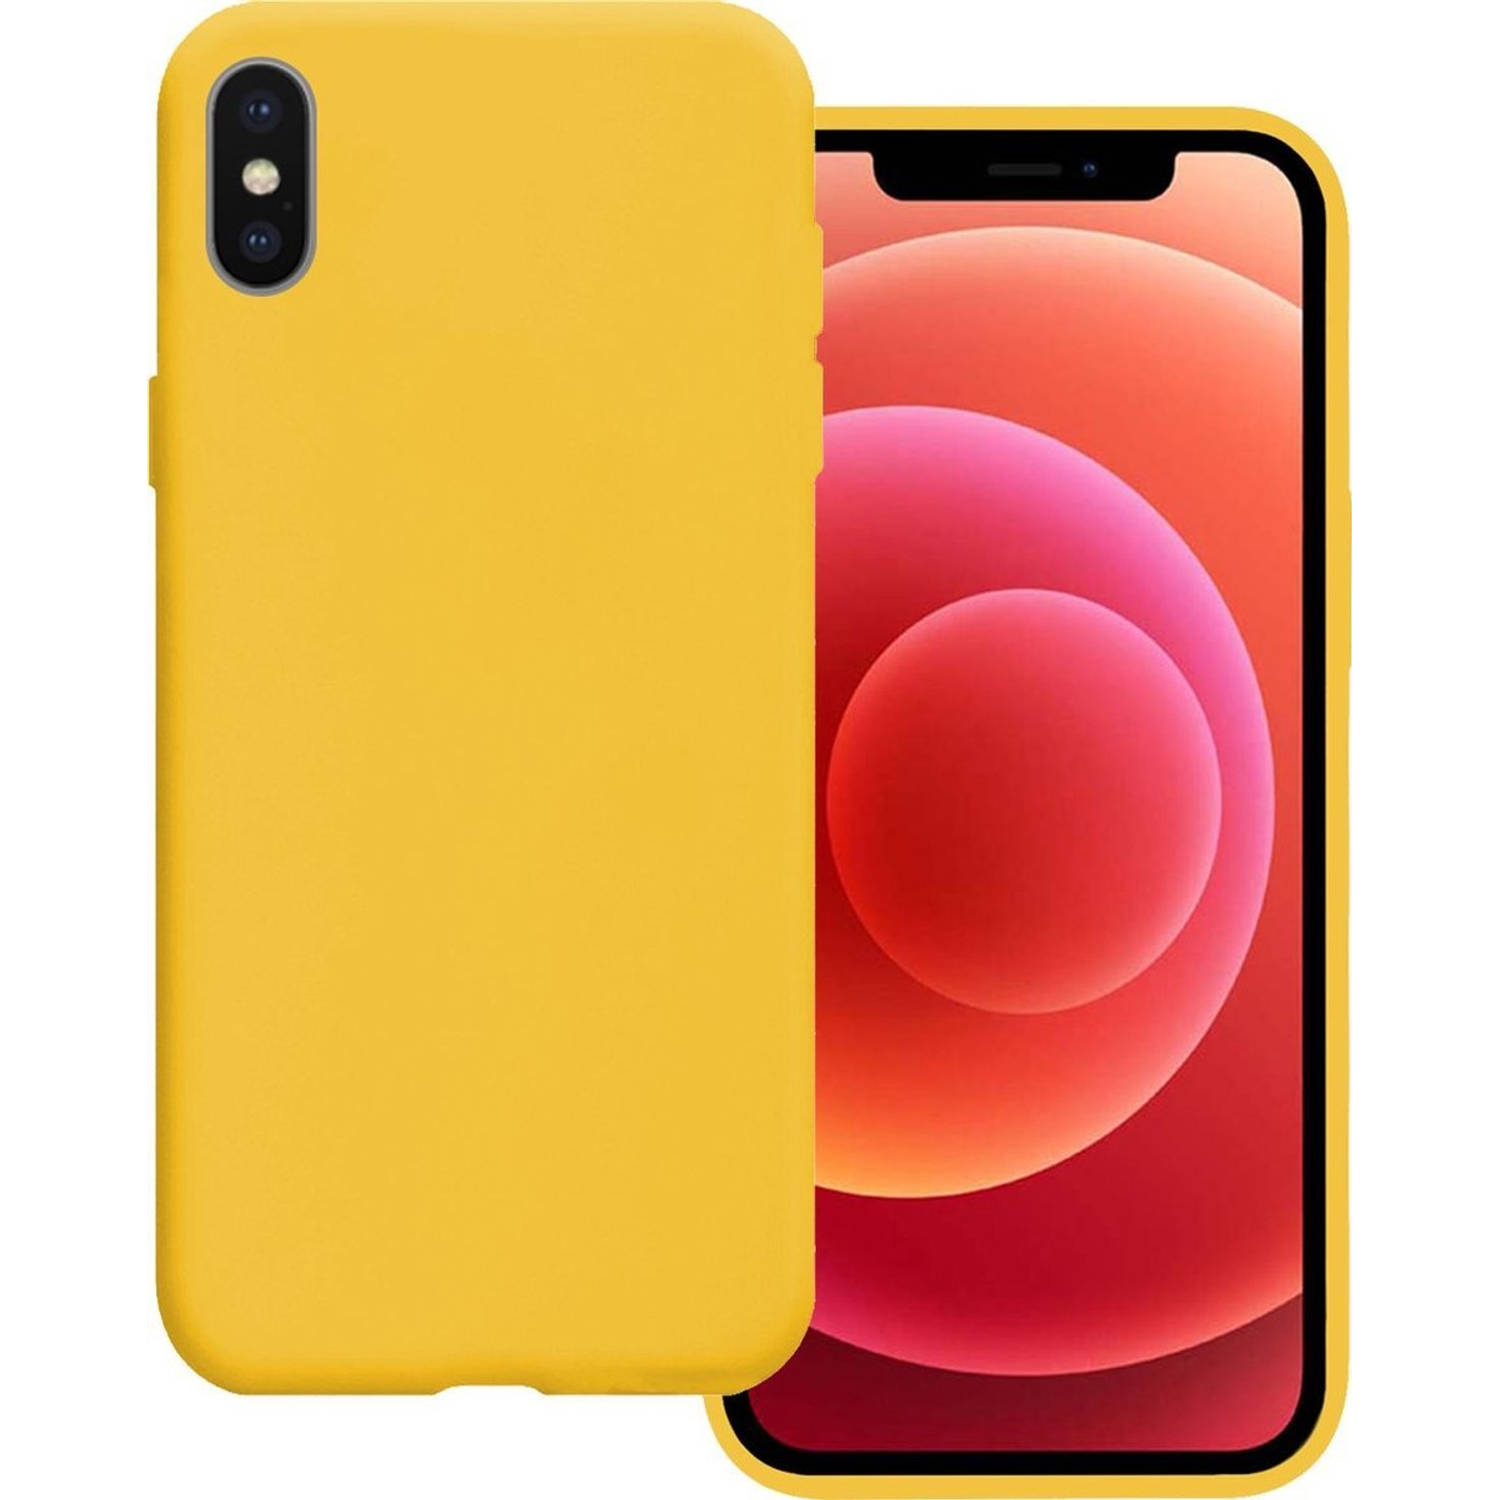 Basey Iphone Xs Hoesje Siliconen Hoes Case Cover Iphone Xs-geel